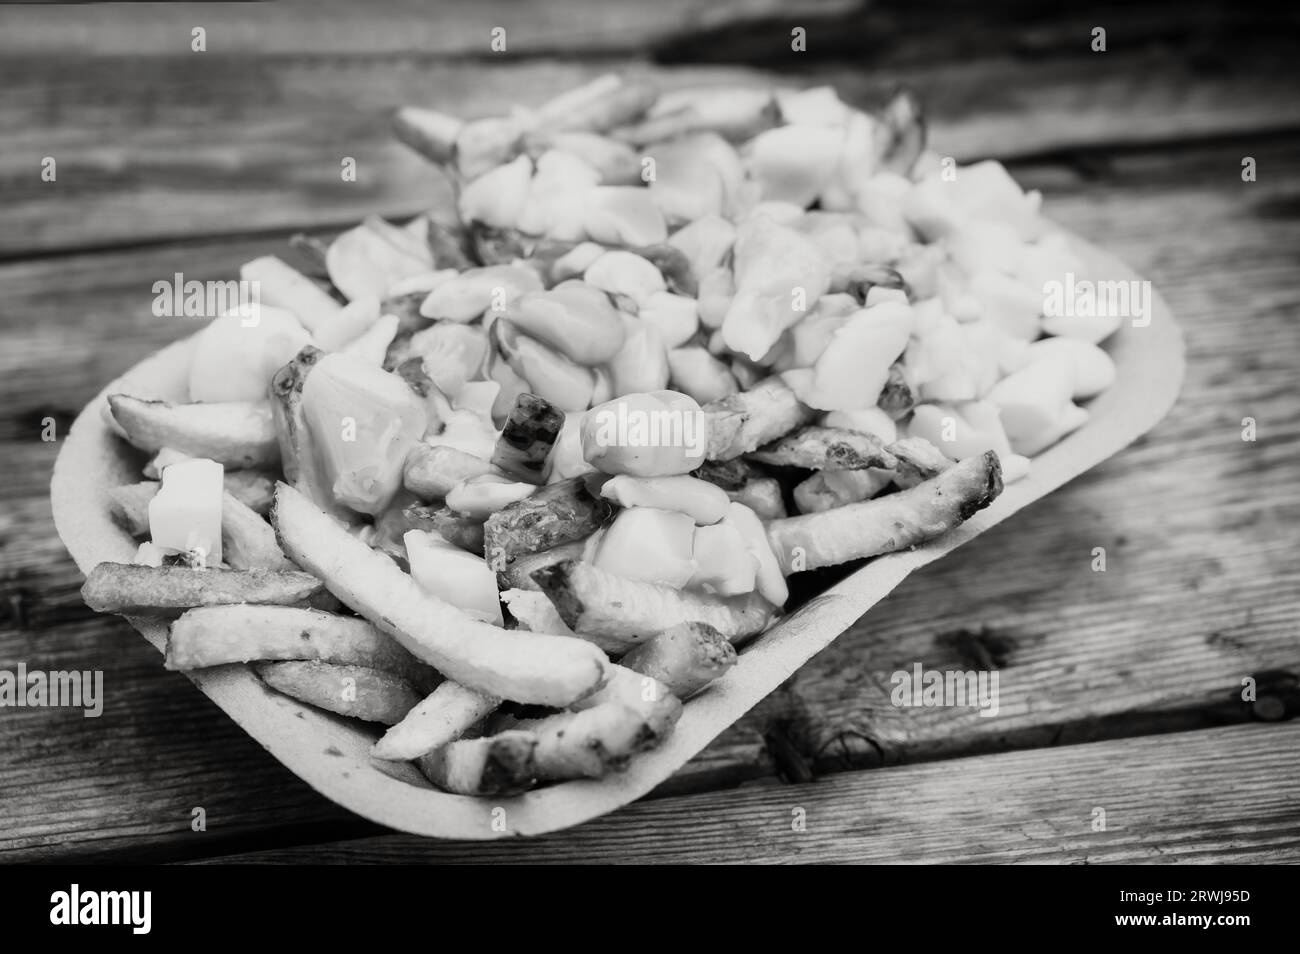 An order of poutine, a French Canadian dish of French fries, gravy, and cheese curds, at a stake street food stand.  Black and white image. Stock Photo